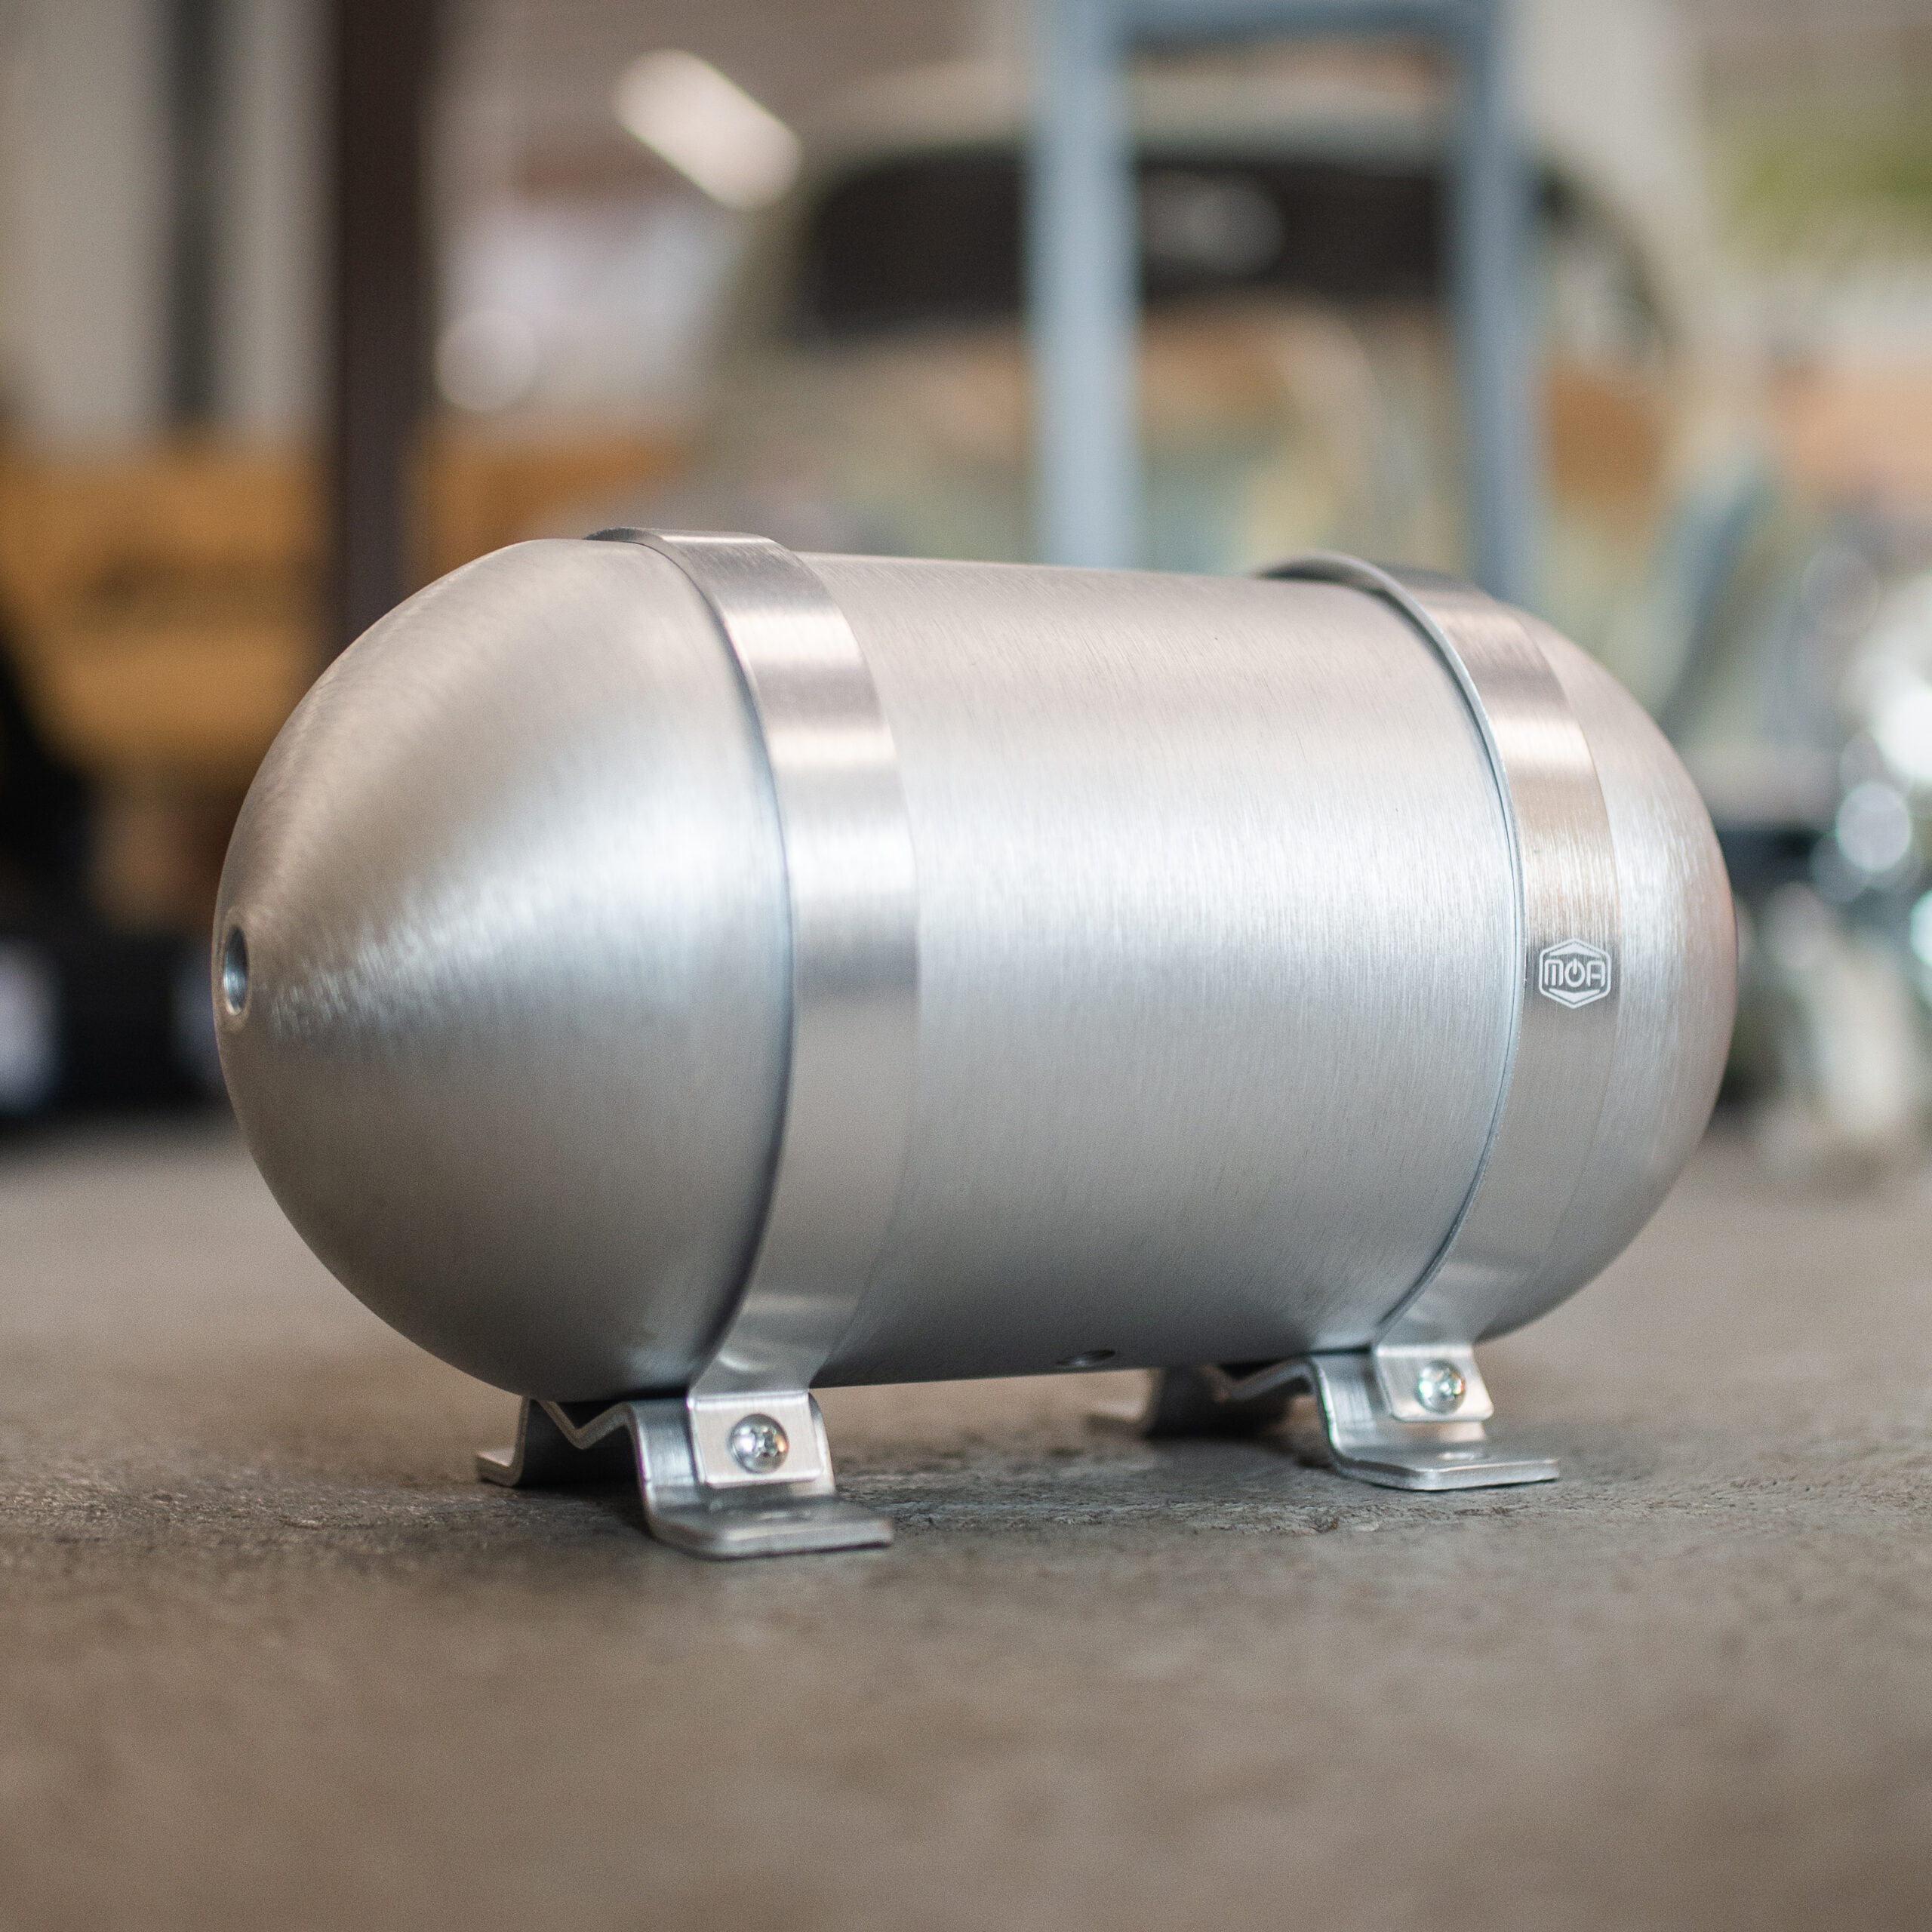 MOA Seamless Air Suspension Tank Range – What best suits your build?